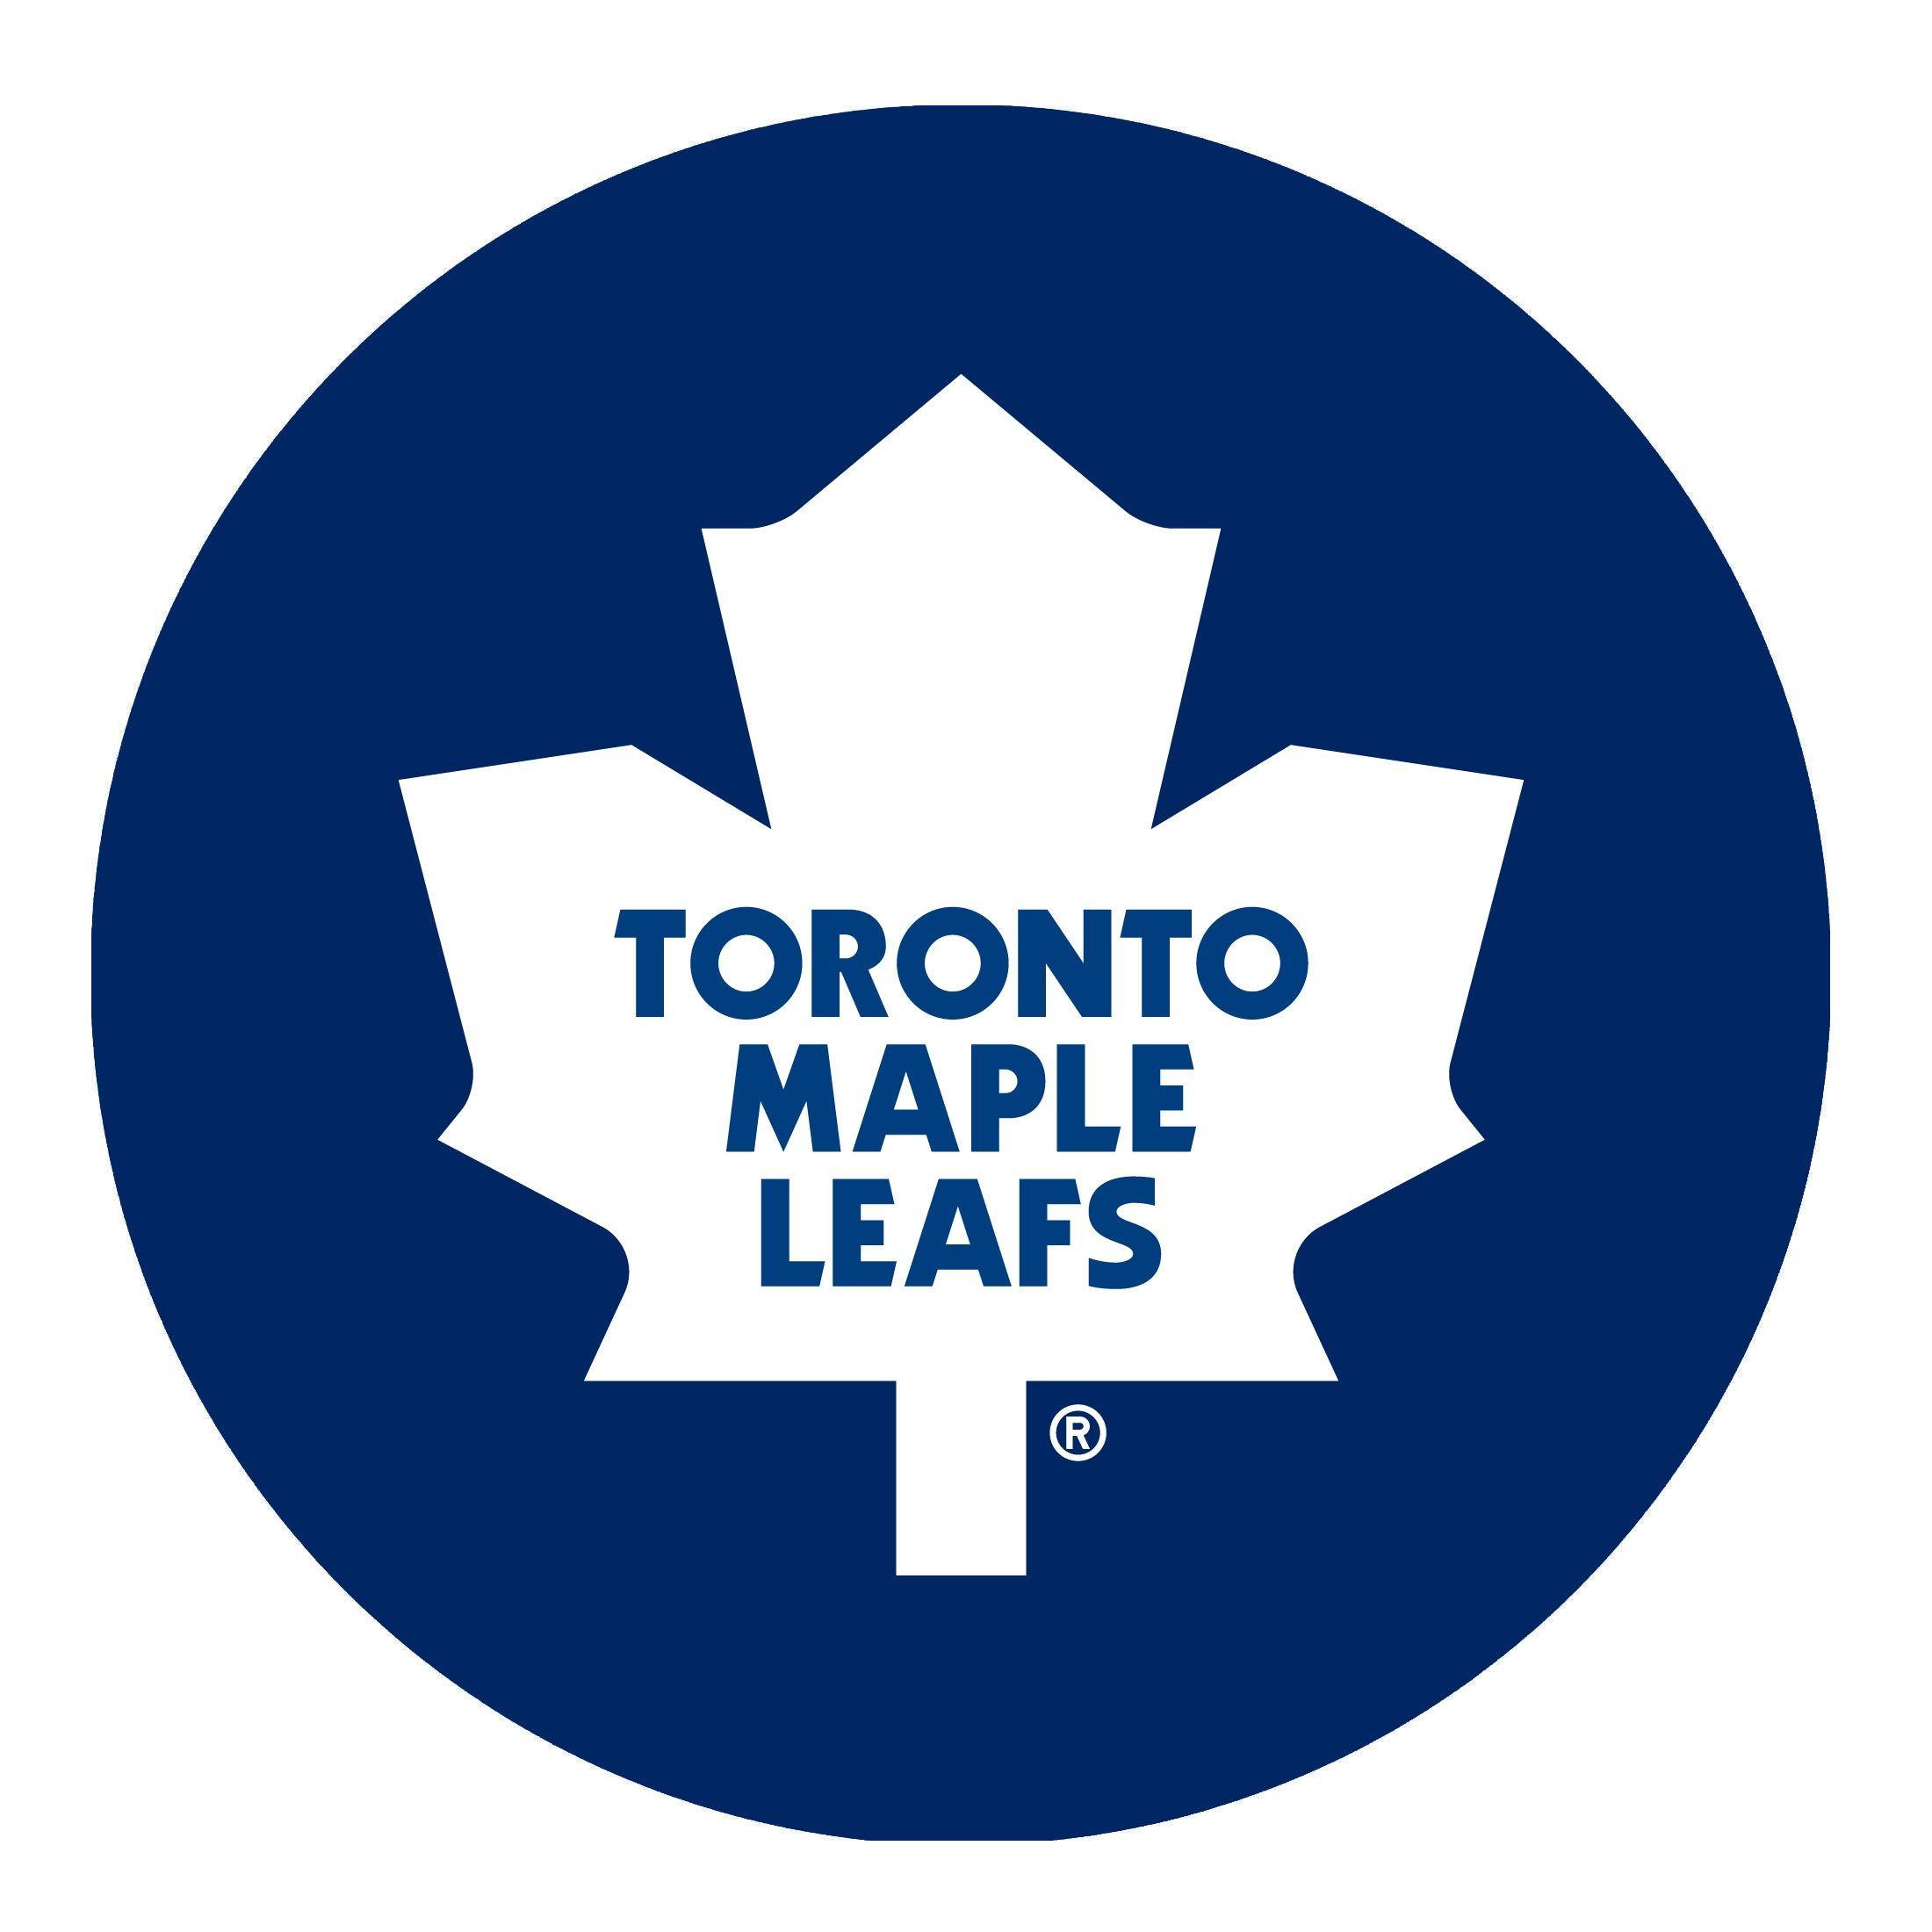 Toronto Maple Leafs Logo - The Toronto Maple Leafs | Canadiana Connection